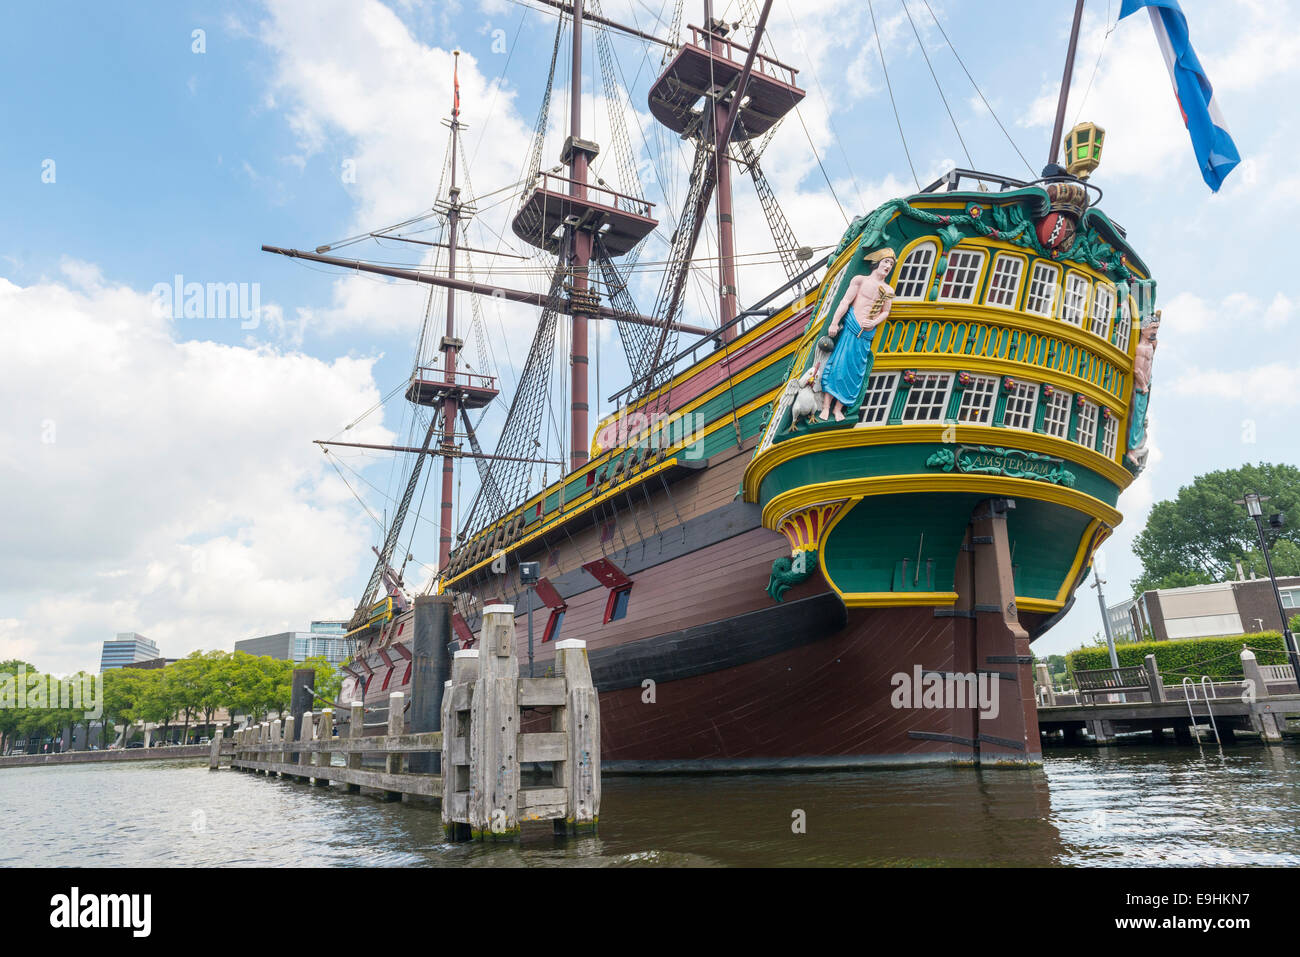 The Stad Amsterdam (City of Amsterdam) is a three-masted clipper, Amsterdam, Netherlands Stock Photo